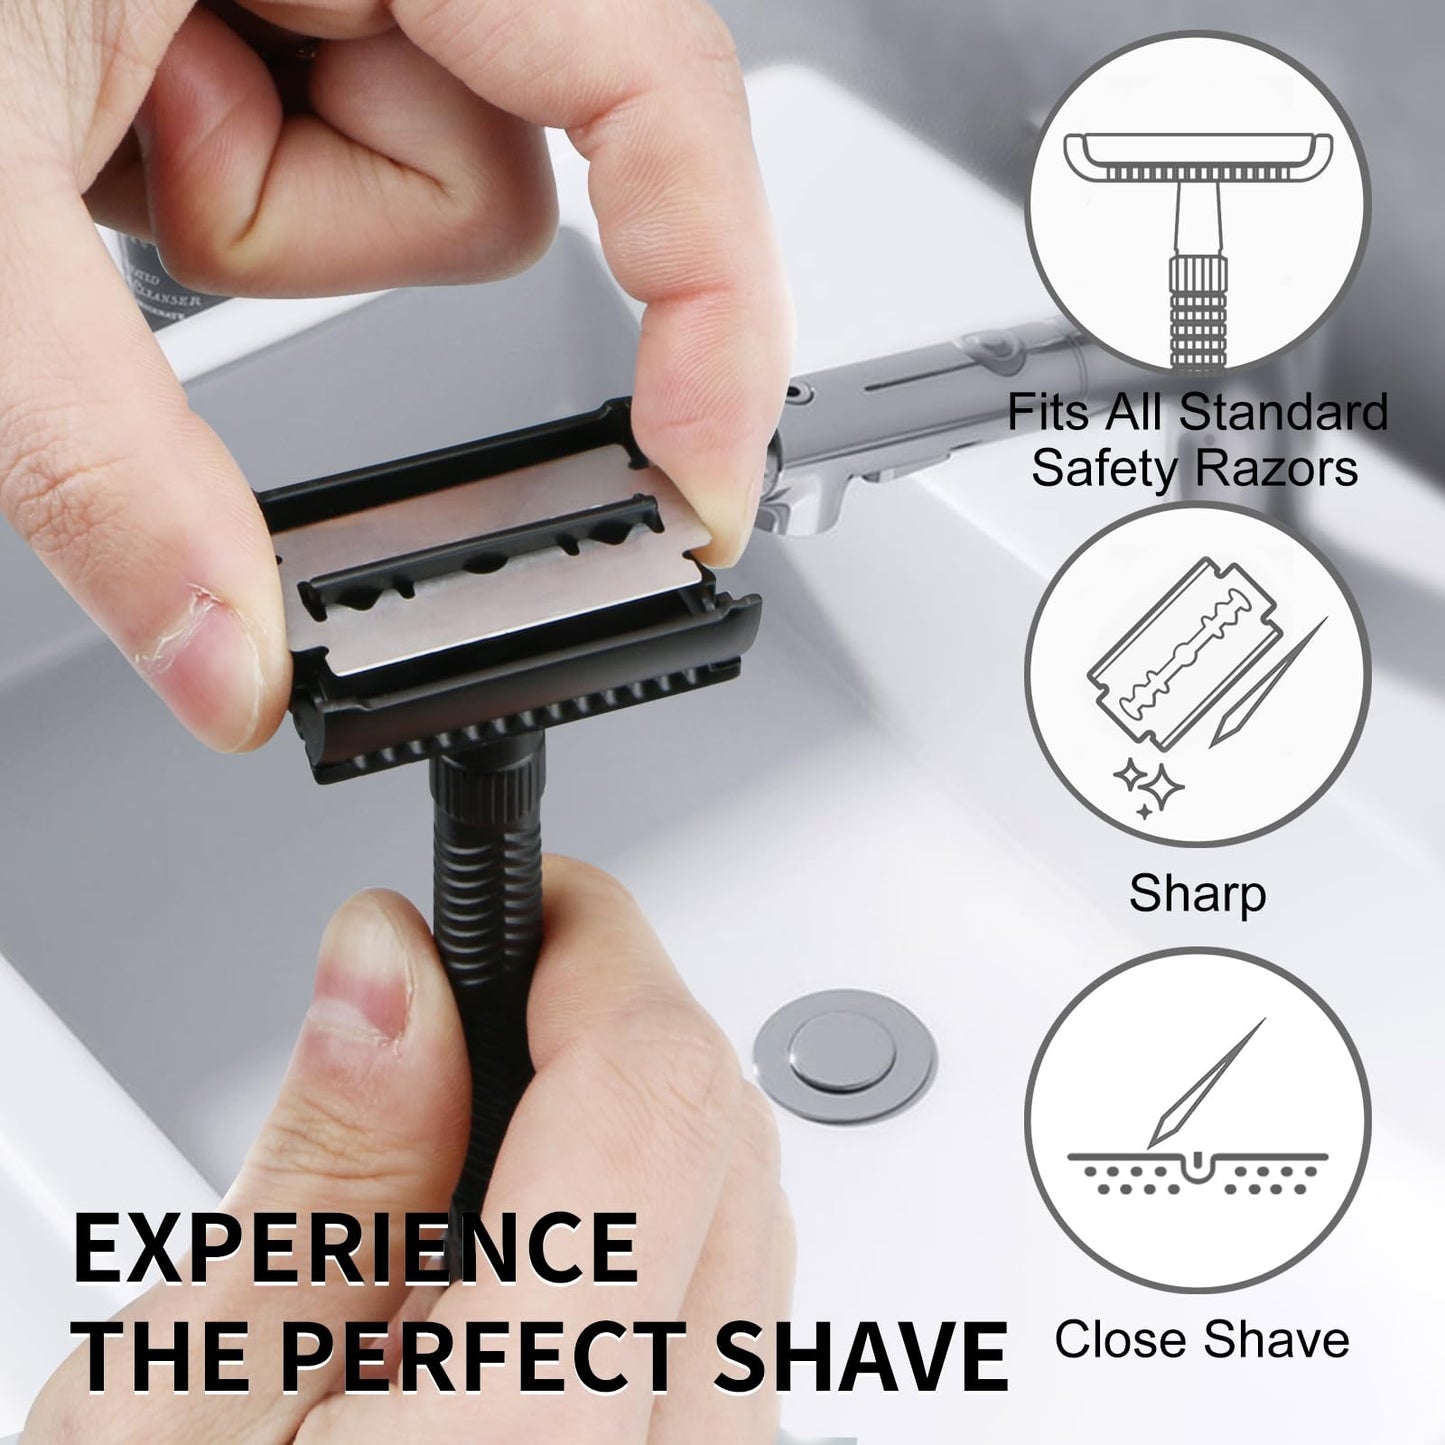 30 Count Safety Razor Blades (USA Stainless Steel, Platinum Coated), with 1 Razor Blade Bank, Metal Sliding Cover Safety Razor Blade Disposal Case, Compact Blade Disposal Container for Travel